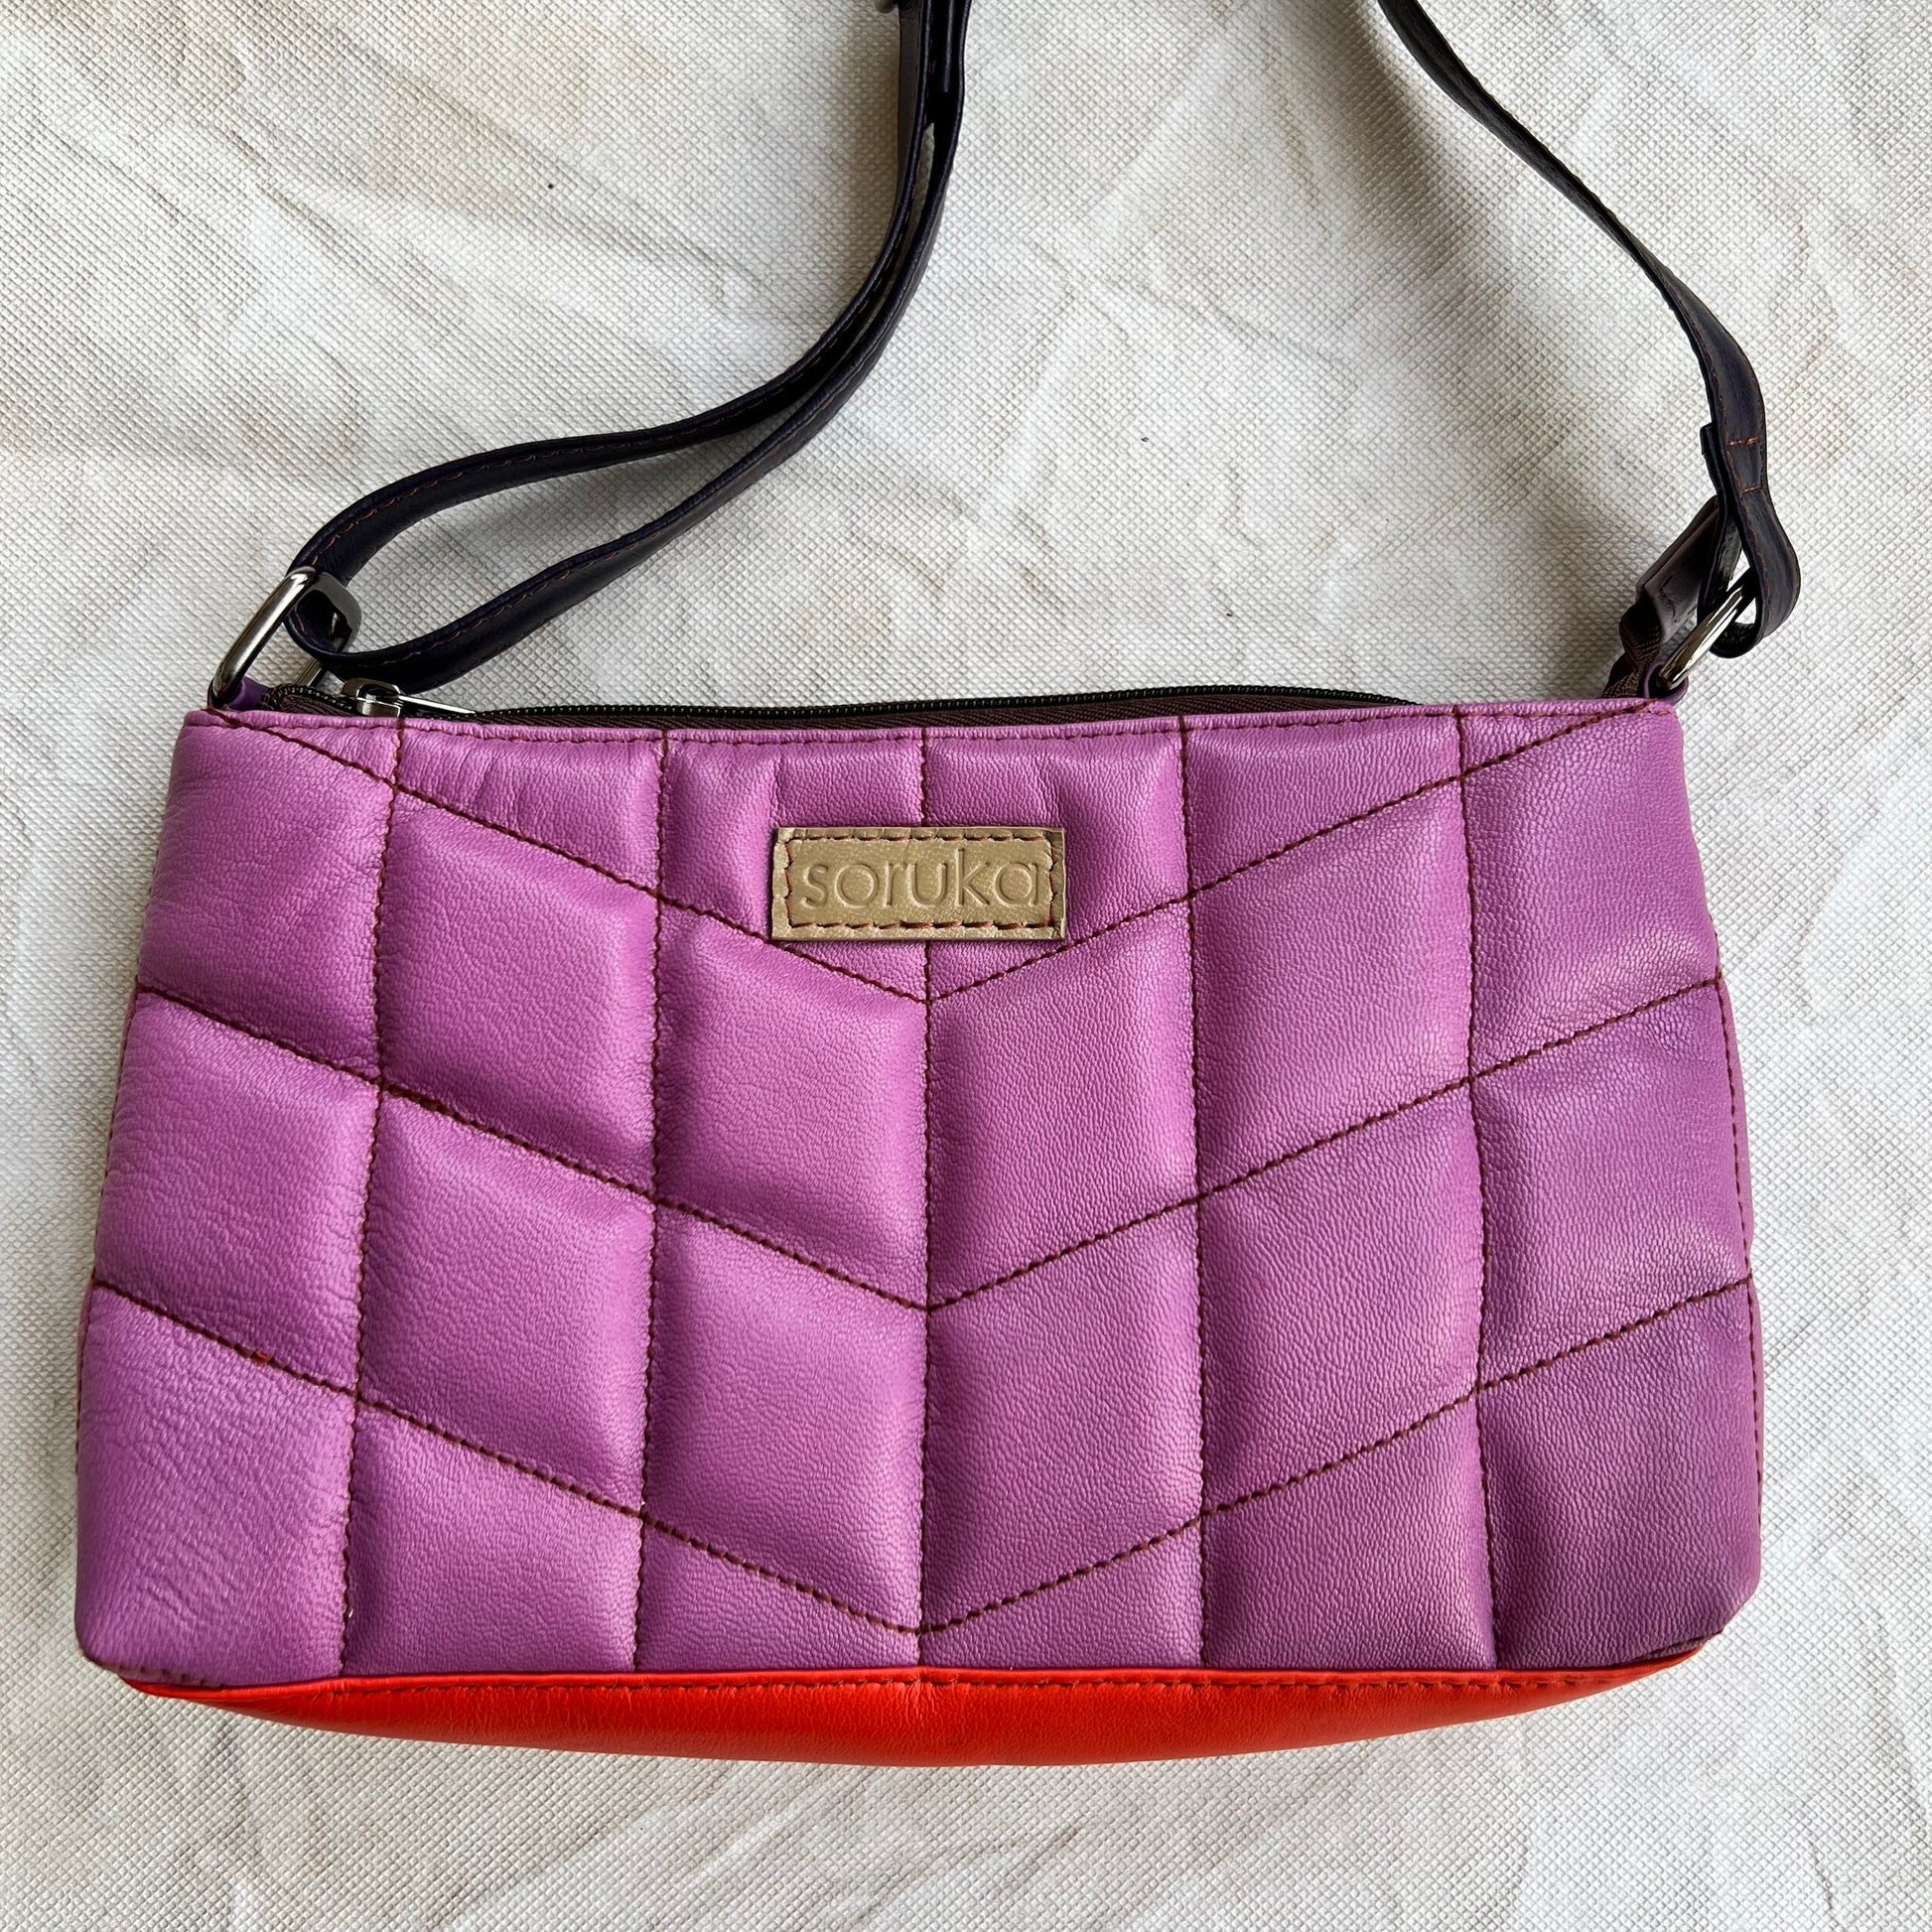 purple puffy quilted leather purse with black  strap and taupe "soruka" logo.